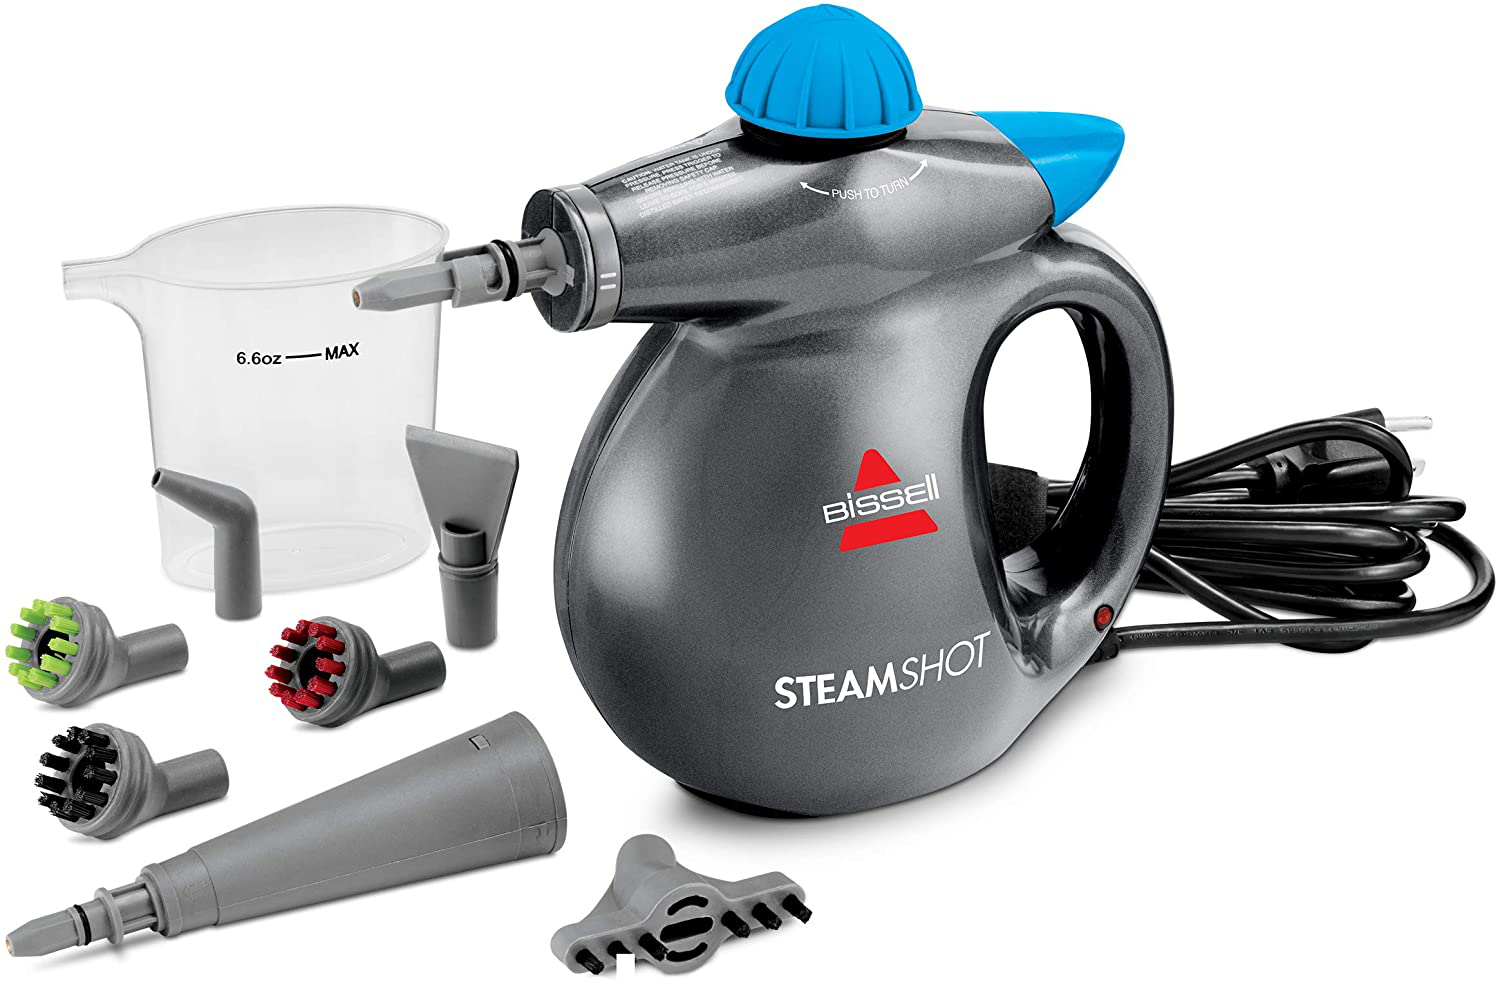 BISSELL SteamShot Hard Surface Steam Cleaner with Natural Sanitization, Multi-Surface Tools Included to Remove Dirt, Grime, Grease, and More